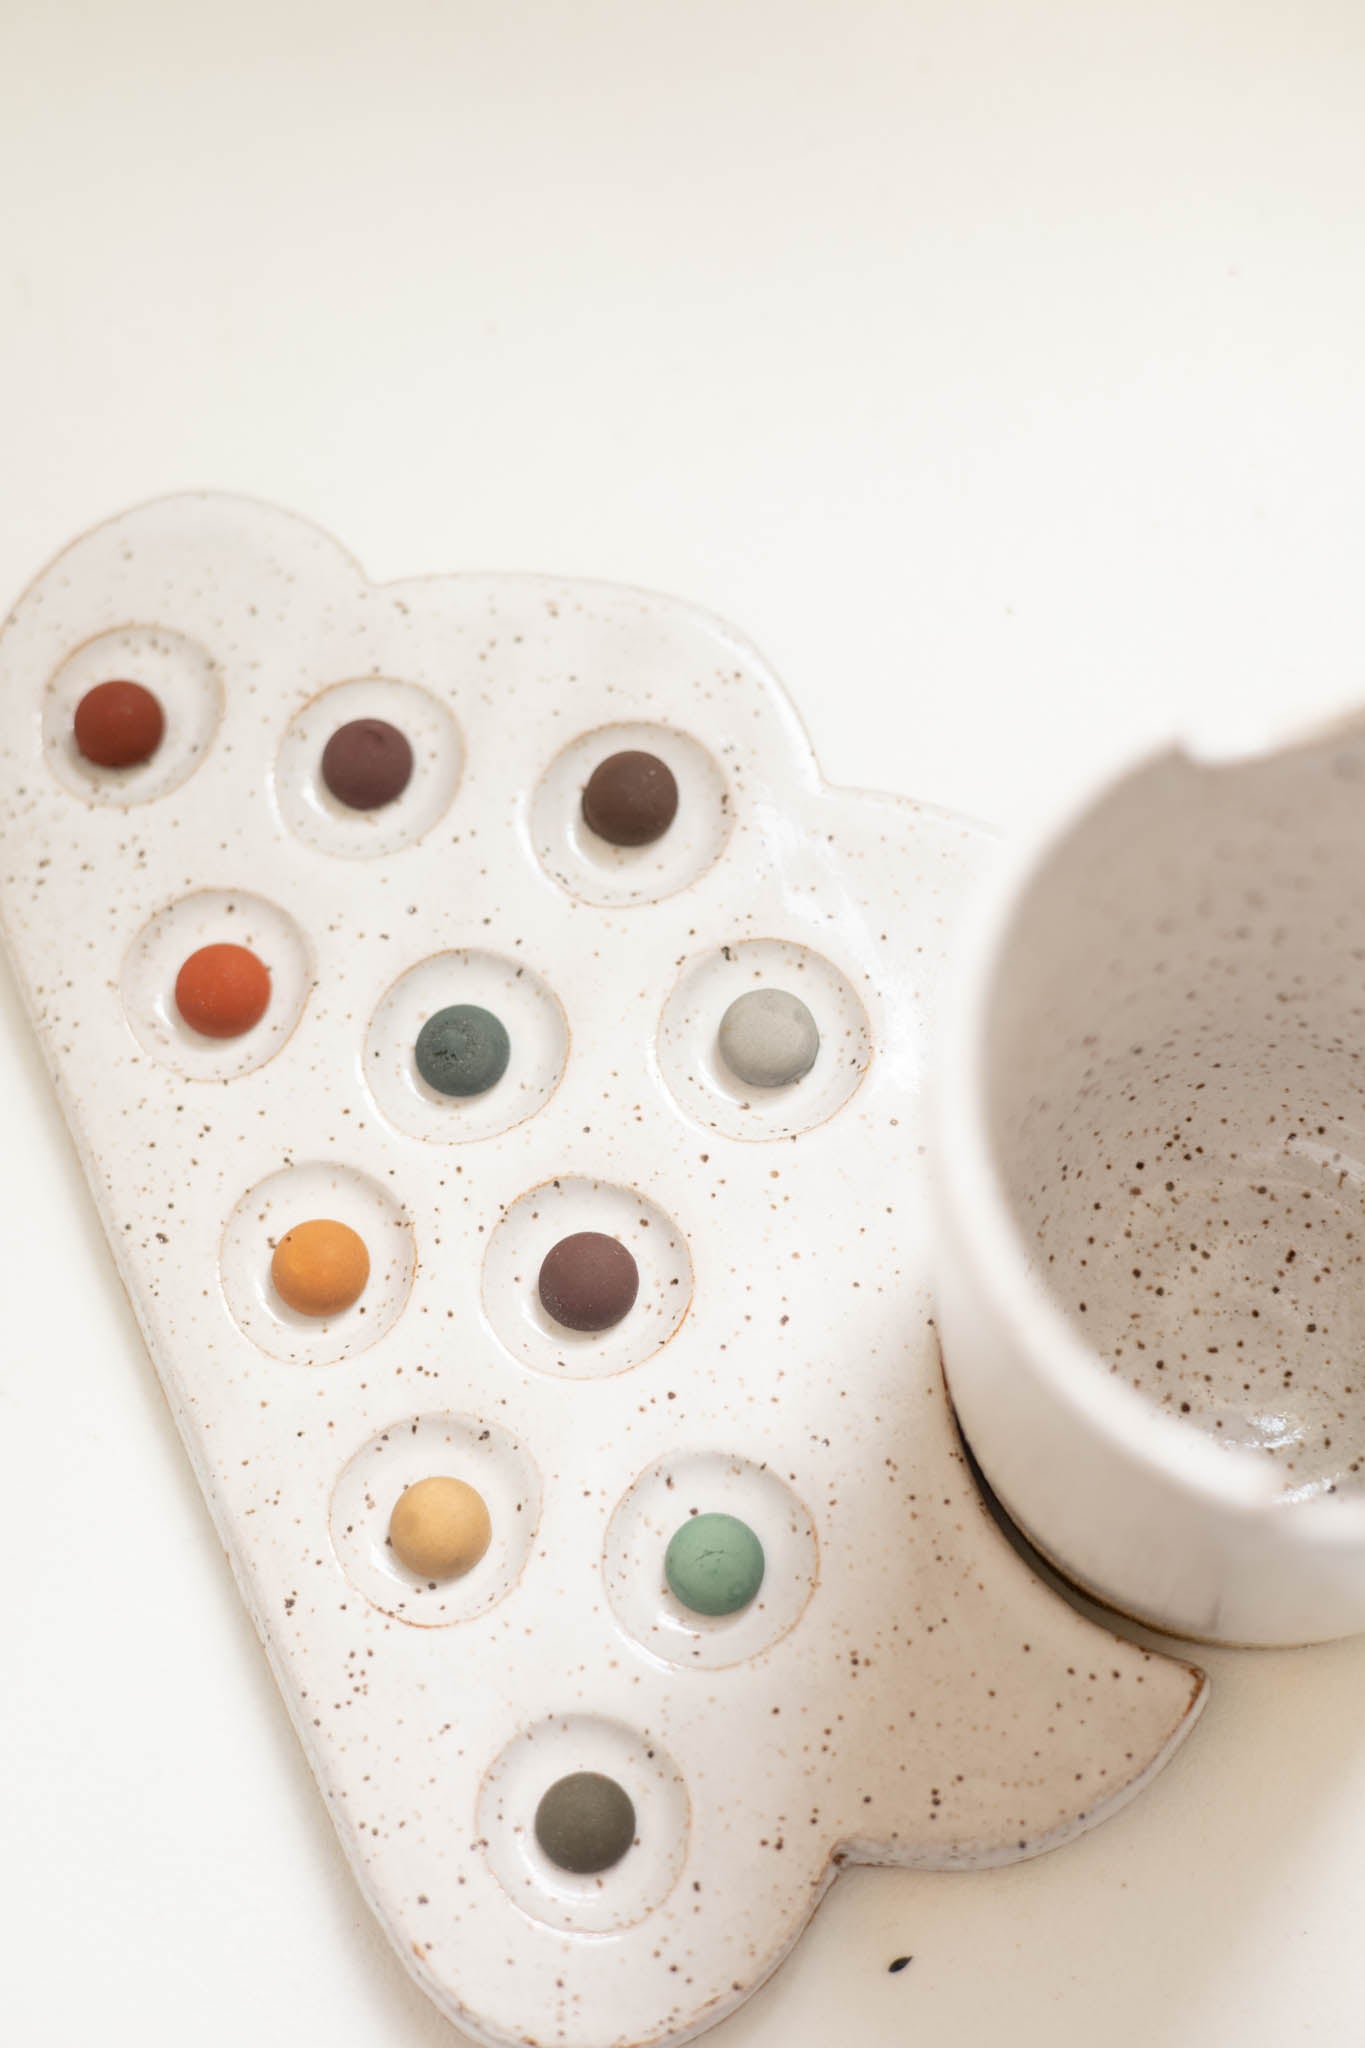 Handmade Ceramic Paint Palettes - Life After Breakfast